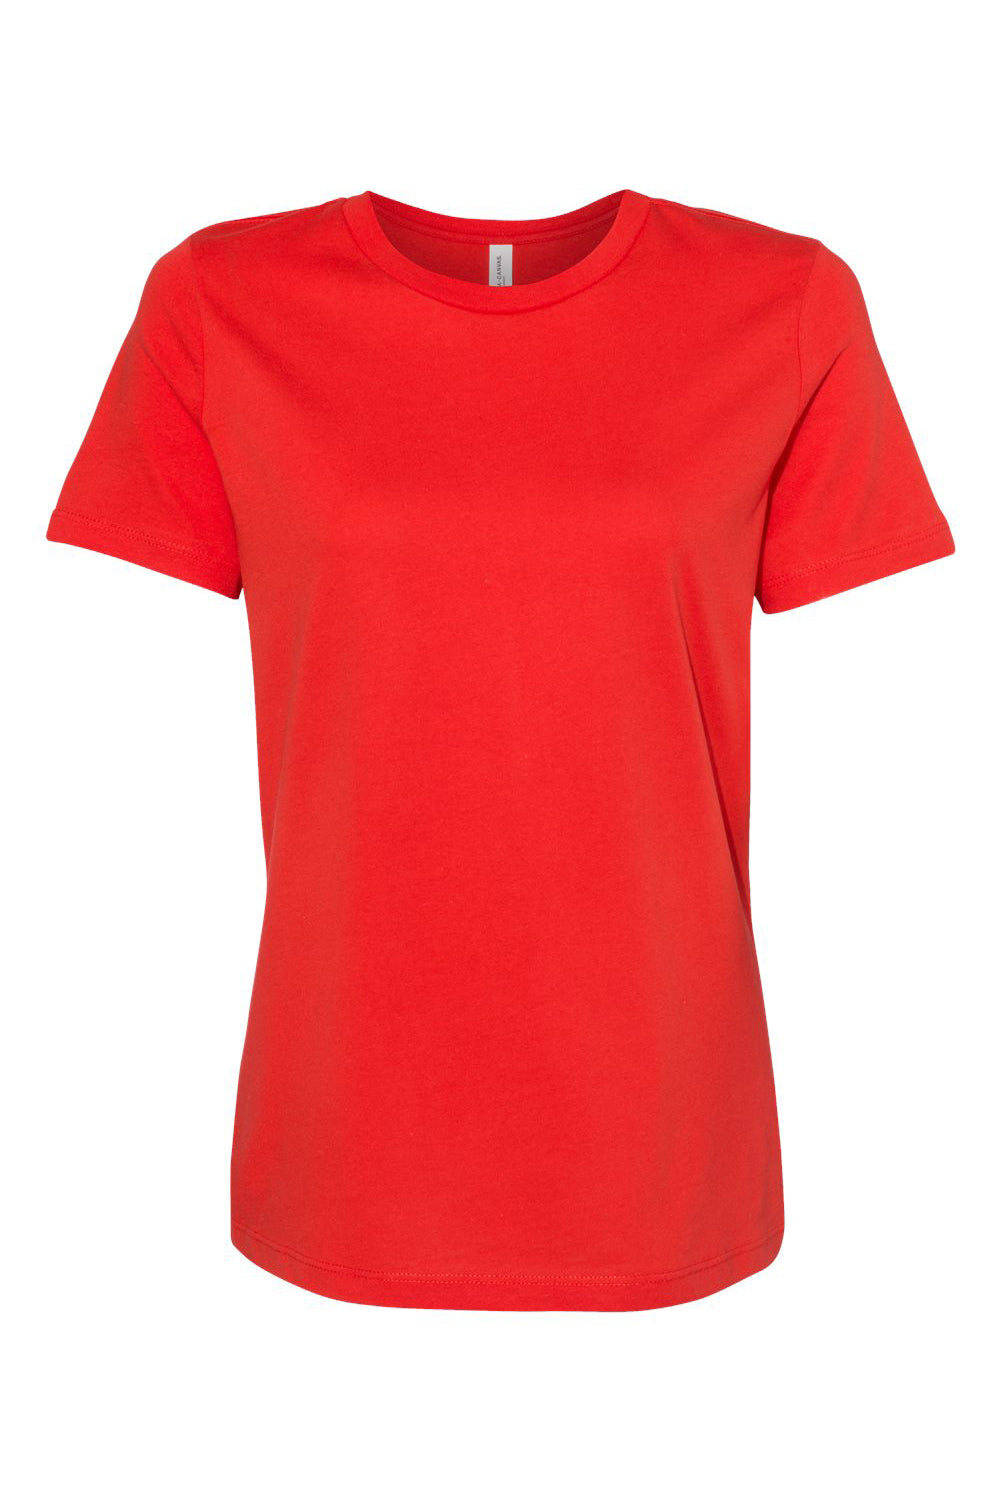 Bella + Canvas BC6400/B6400/6400 Womens Relaxed Jersey Short Sleeve Crewneck T-Shirt Poppy Red Flat Front